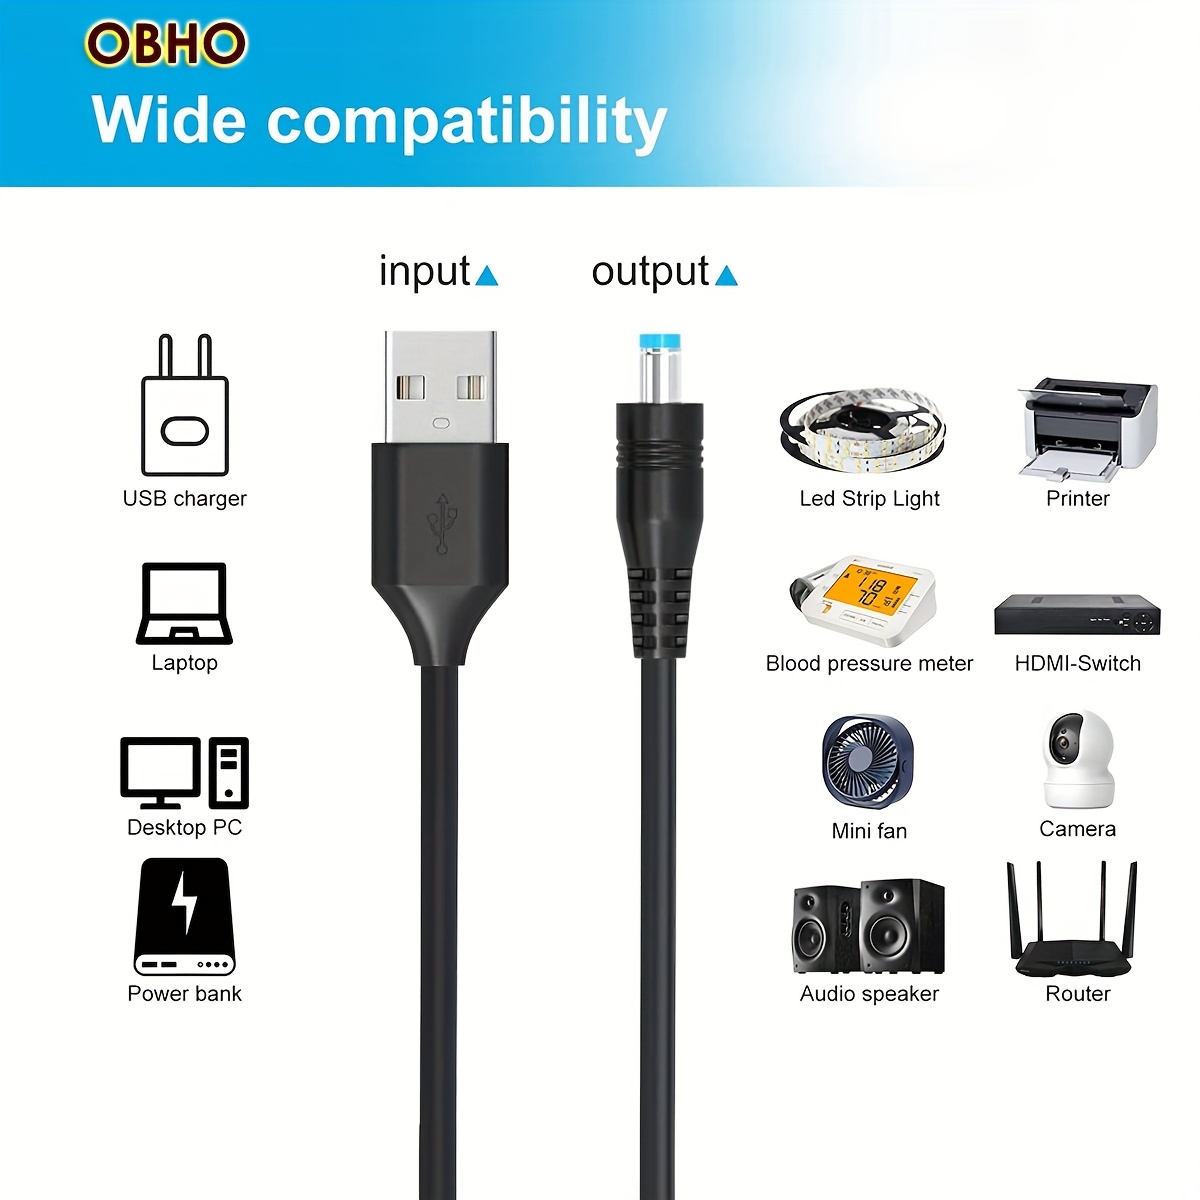 USB to DC Cable, 3.5x1.35 mm 5V DC Power Charging Cord